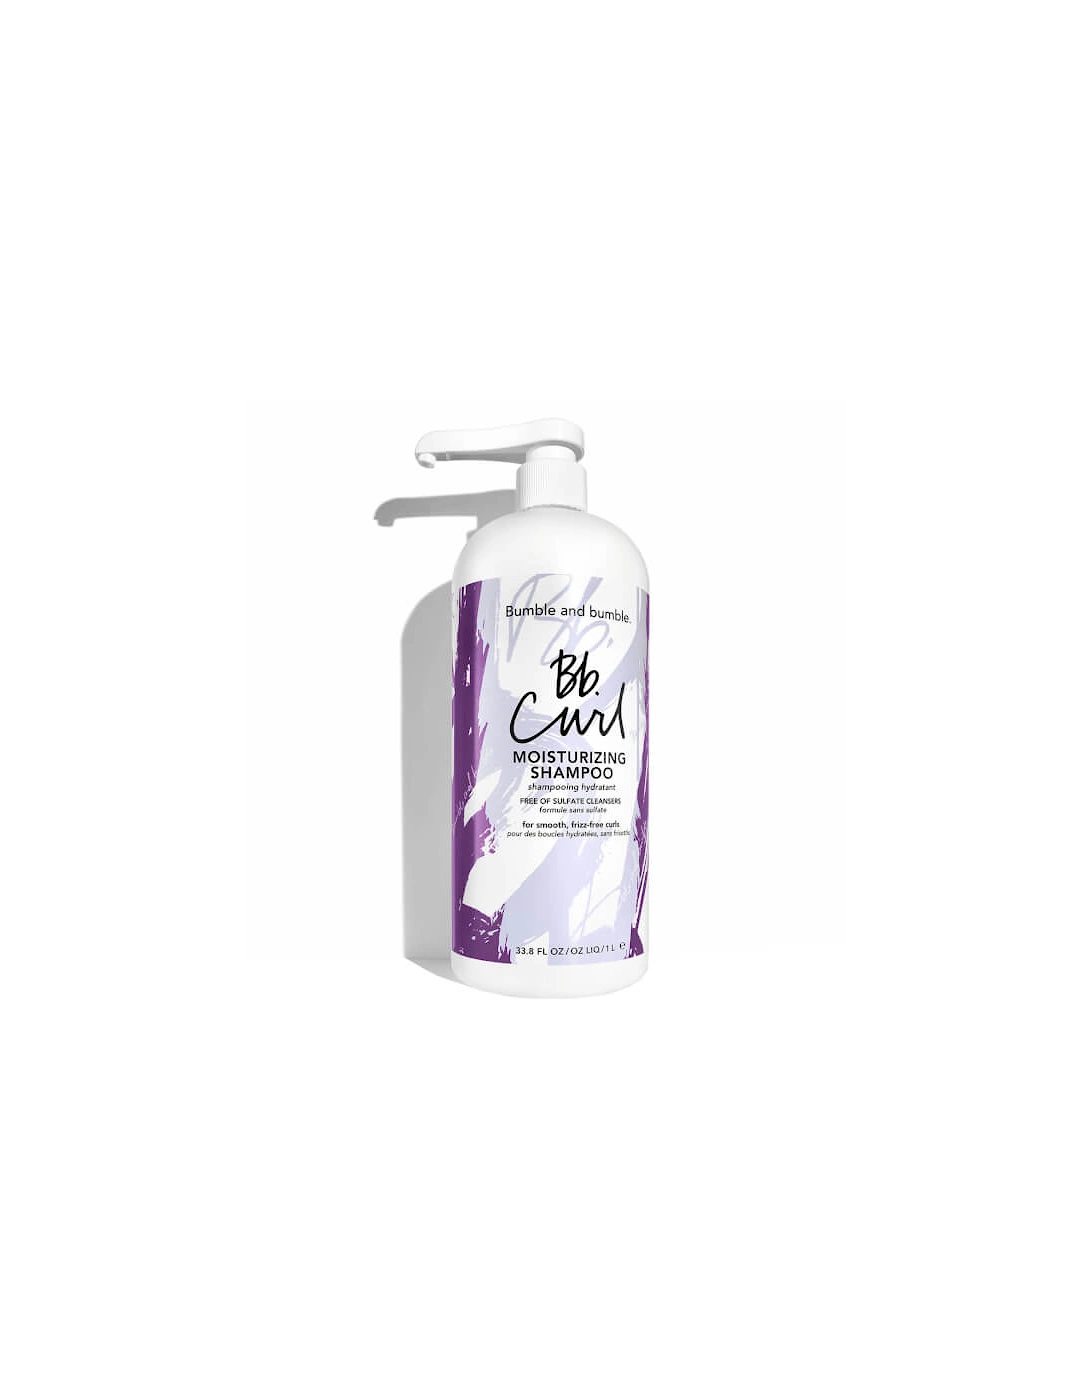 Bumble and bumble Curl Moisturising Shampoo 1L, 2 of 1